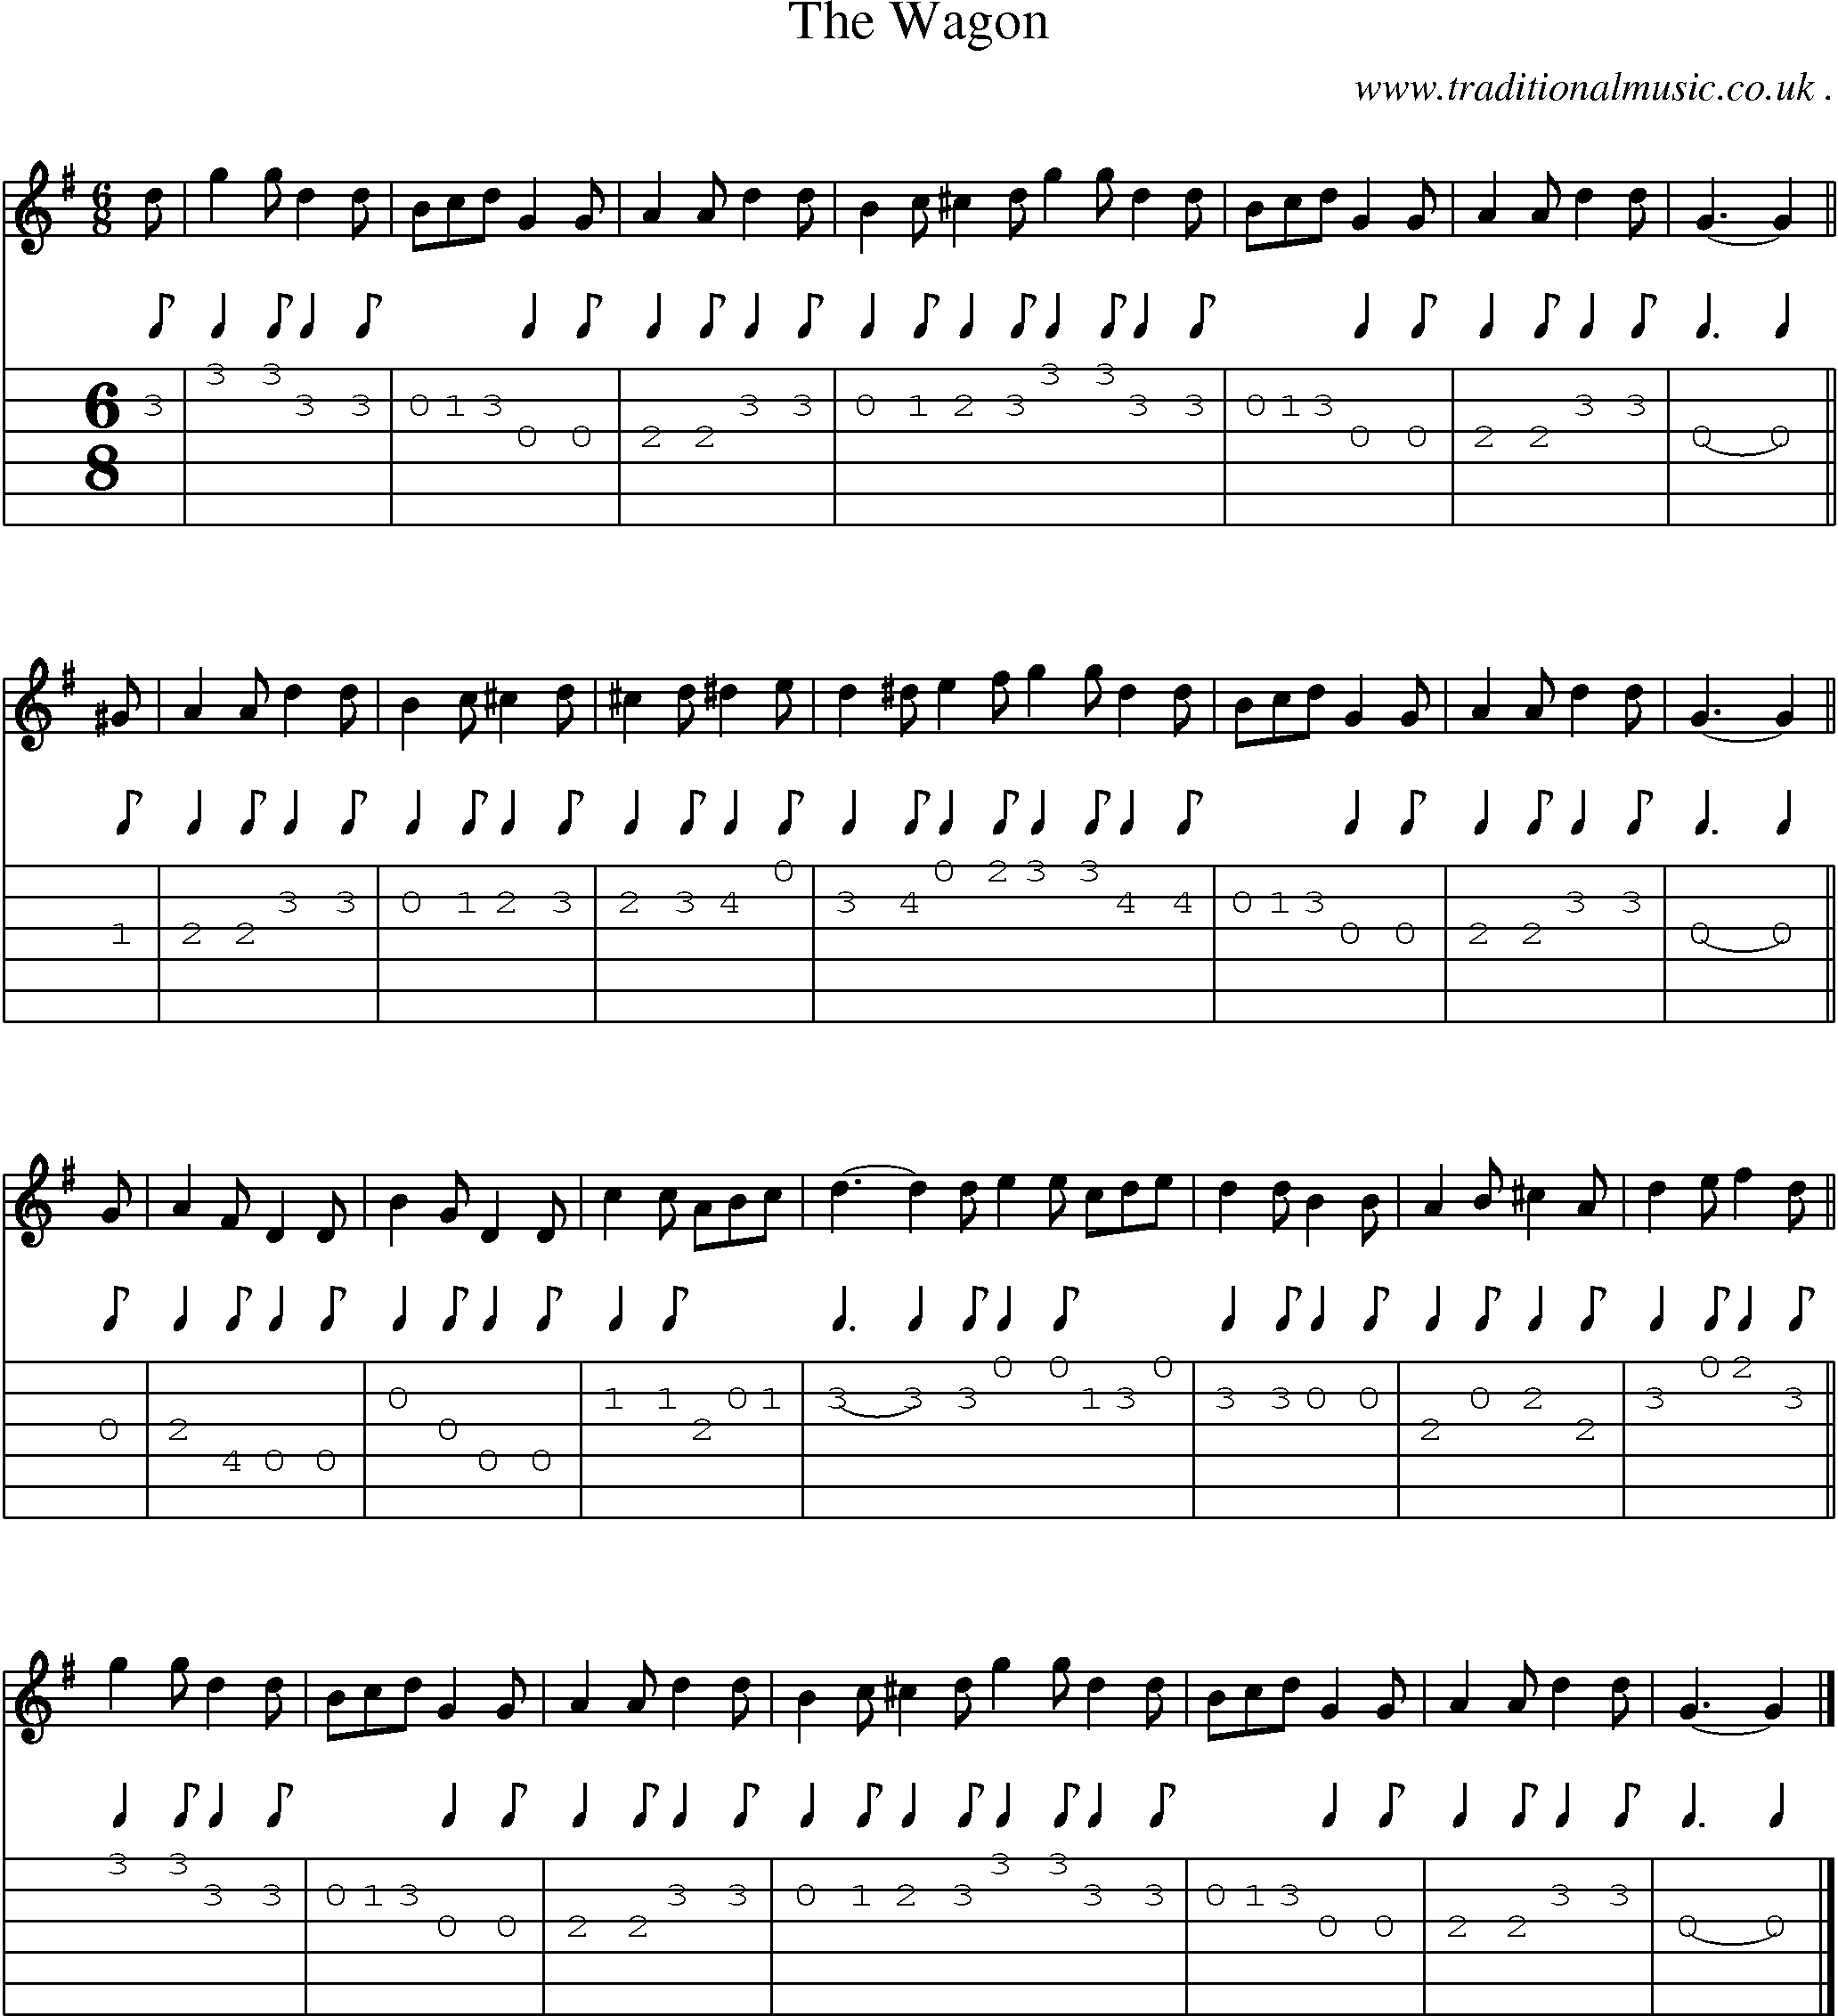 Sheet-music  score, Chords and Guitar Tabs for The Wagon